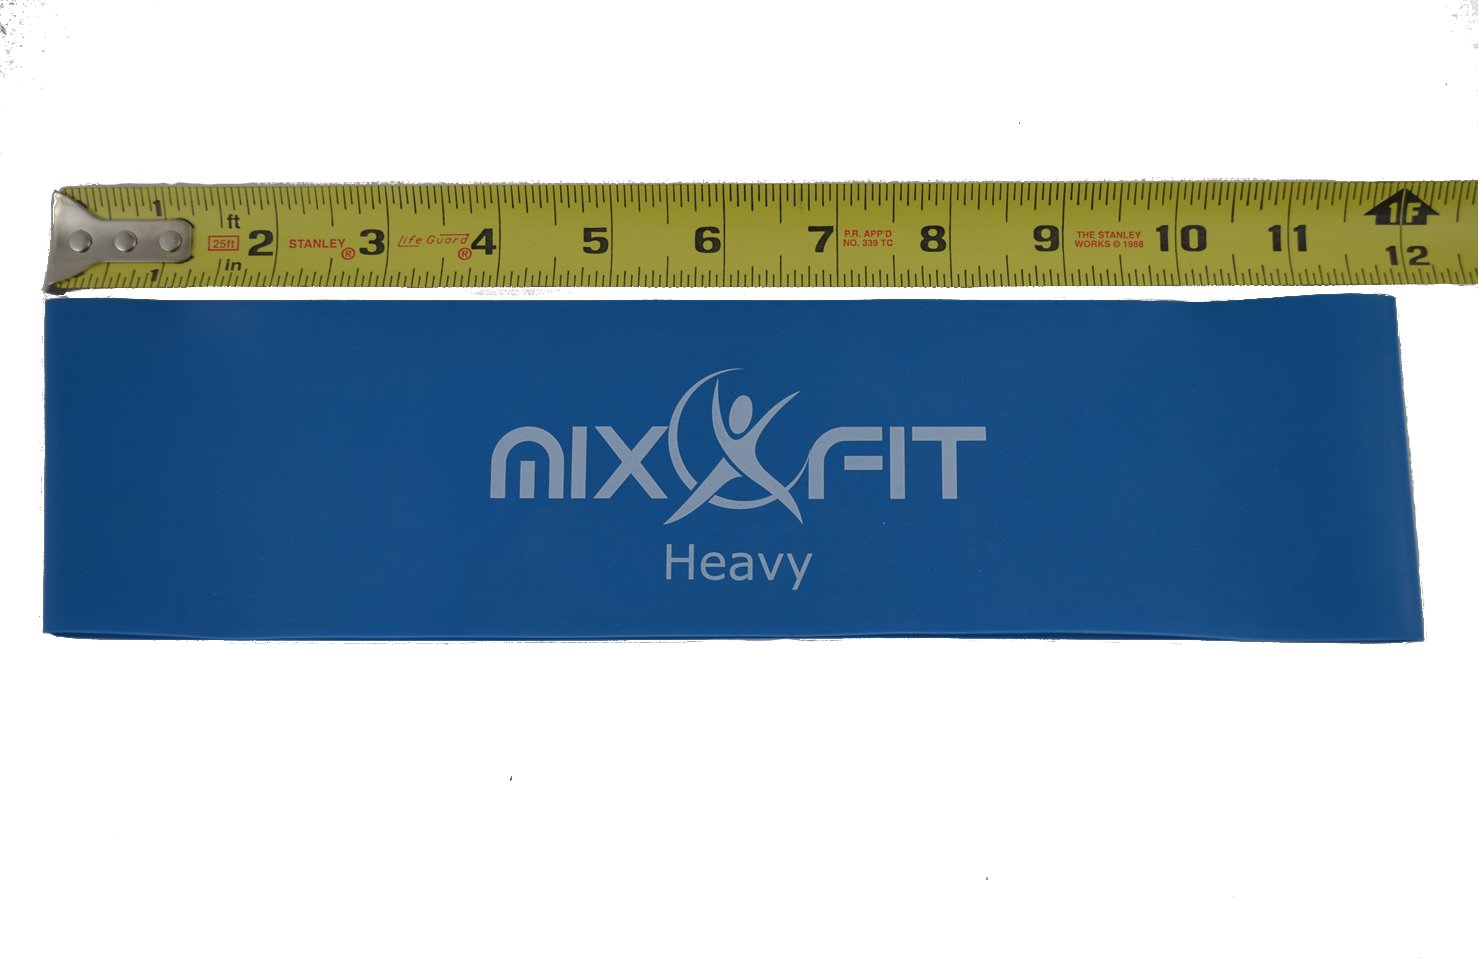 Mixxfit Resistance Bands - Flat Loop Training Exercise Bands. 4 Piece Set in Light, Medium, Heavy and X-heavy Resistant Levels. Great for Home Training and Therapy/rehab Workouts. Use for Yoga and Pilates. Workout Pamphlet and Carrying Bag Included (12"